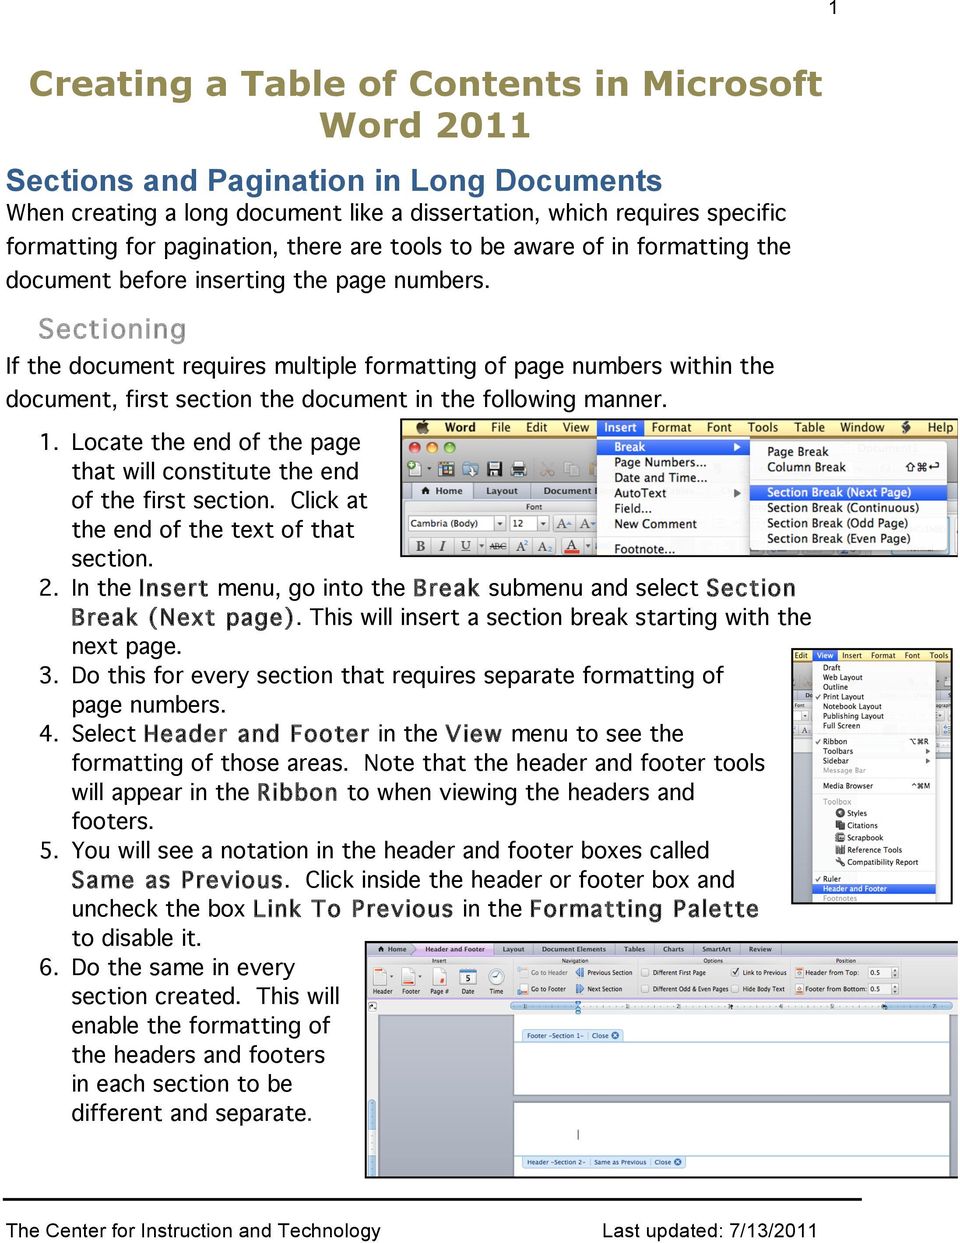 Sectioning If the document requires multiple formatting of page numbers within the document, first section the document in the following manner. 1.